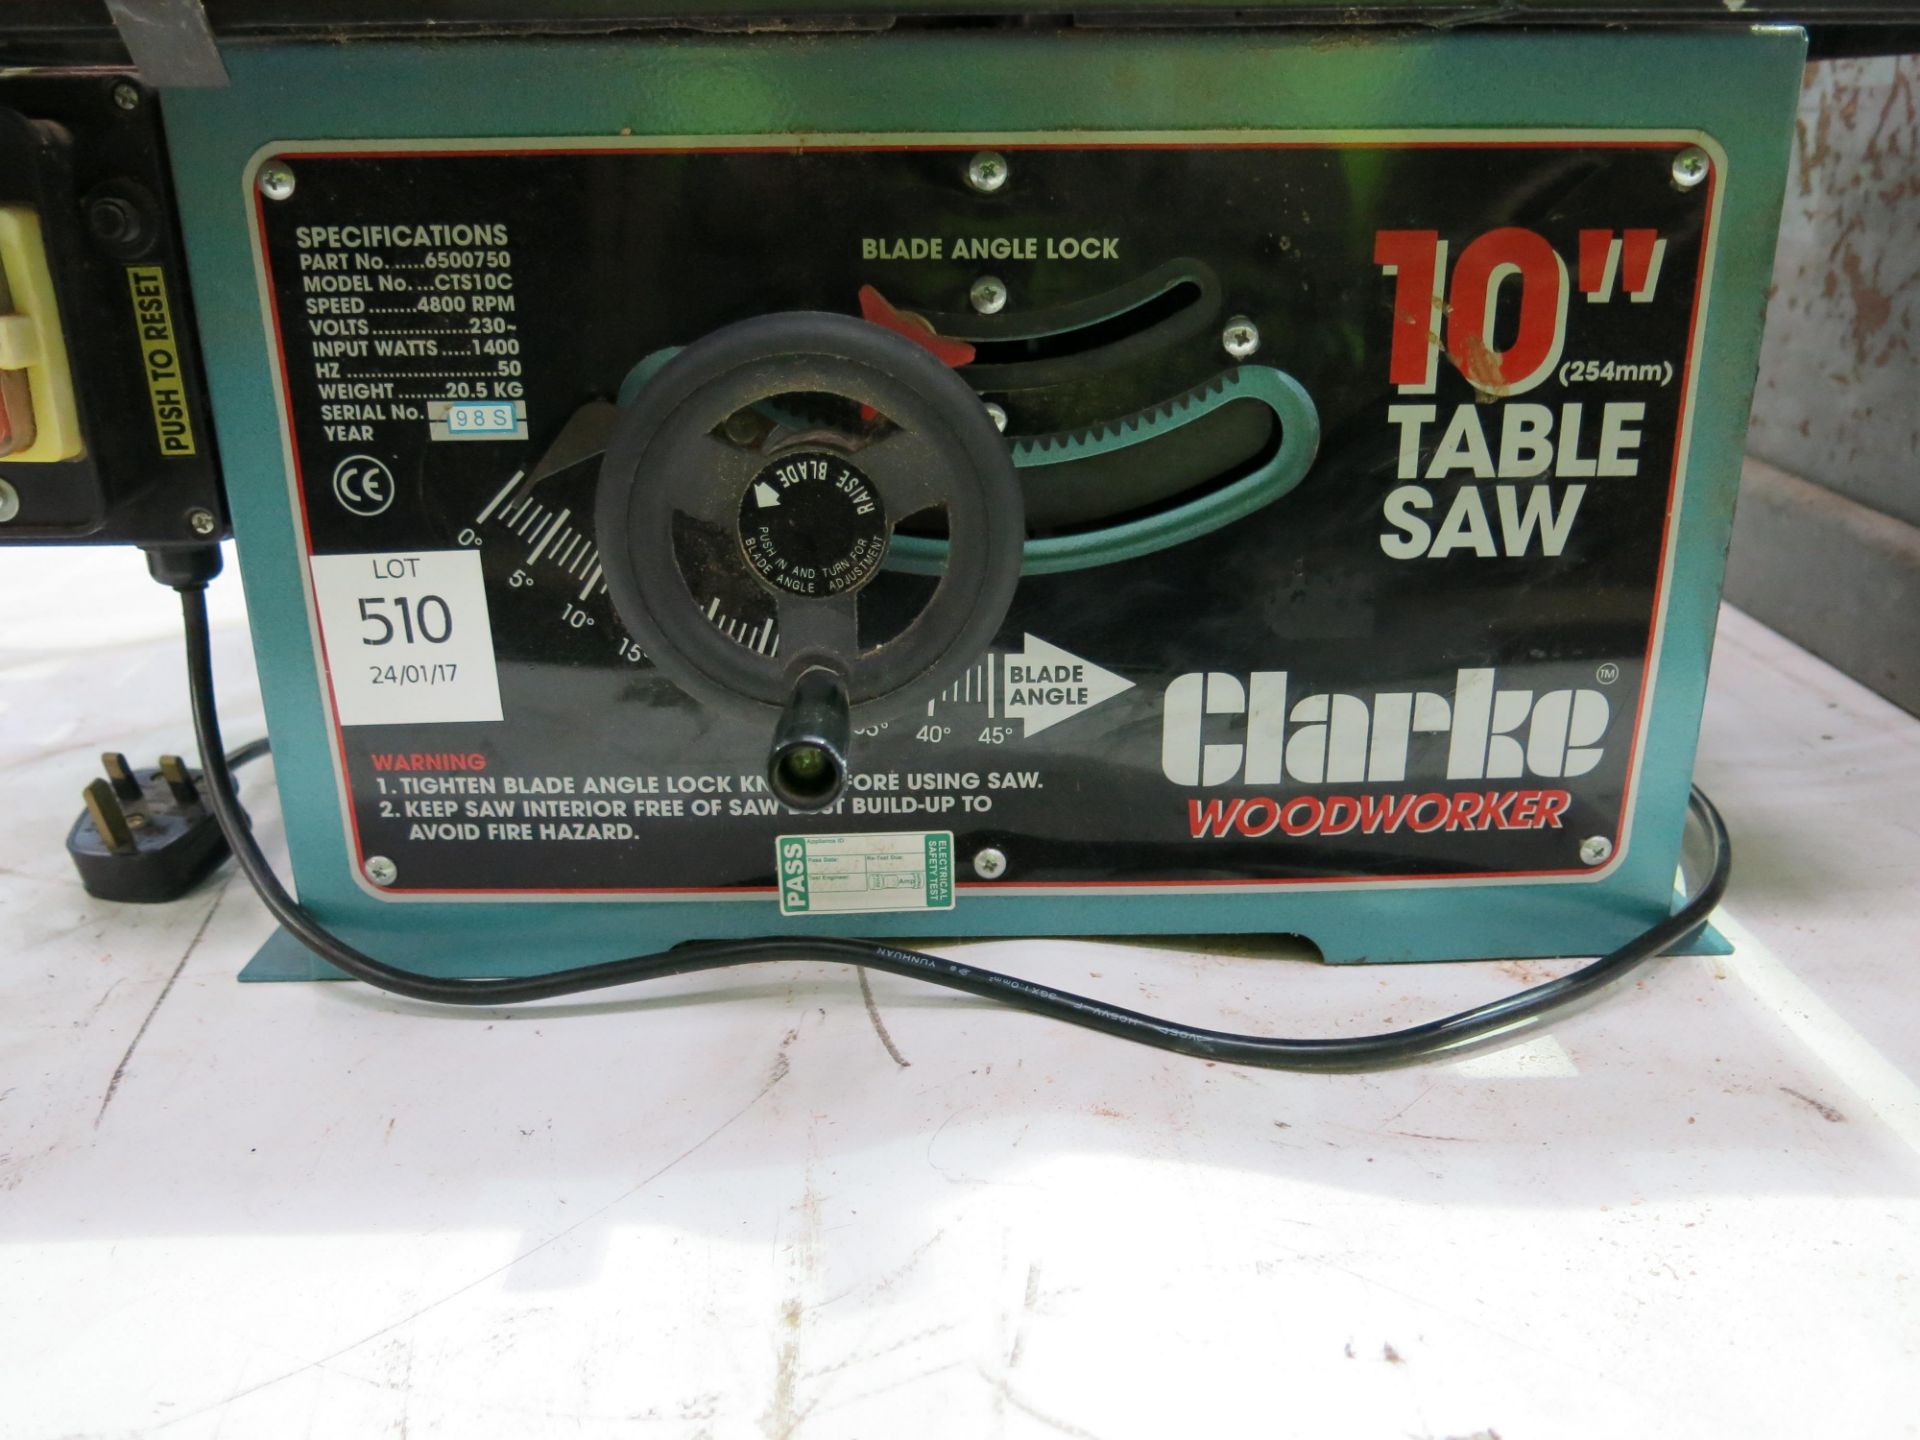 * A Clarke Woodworker 10'' table saw - Image 2 of 2